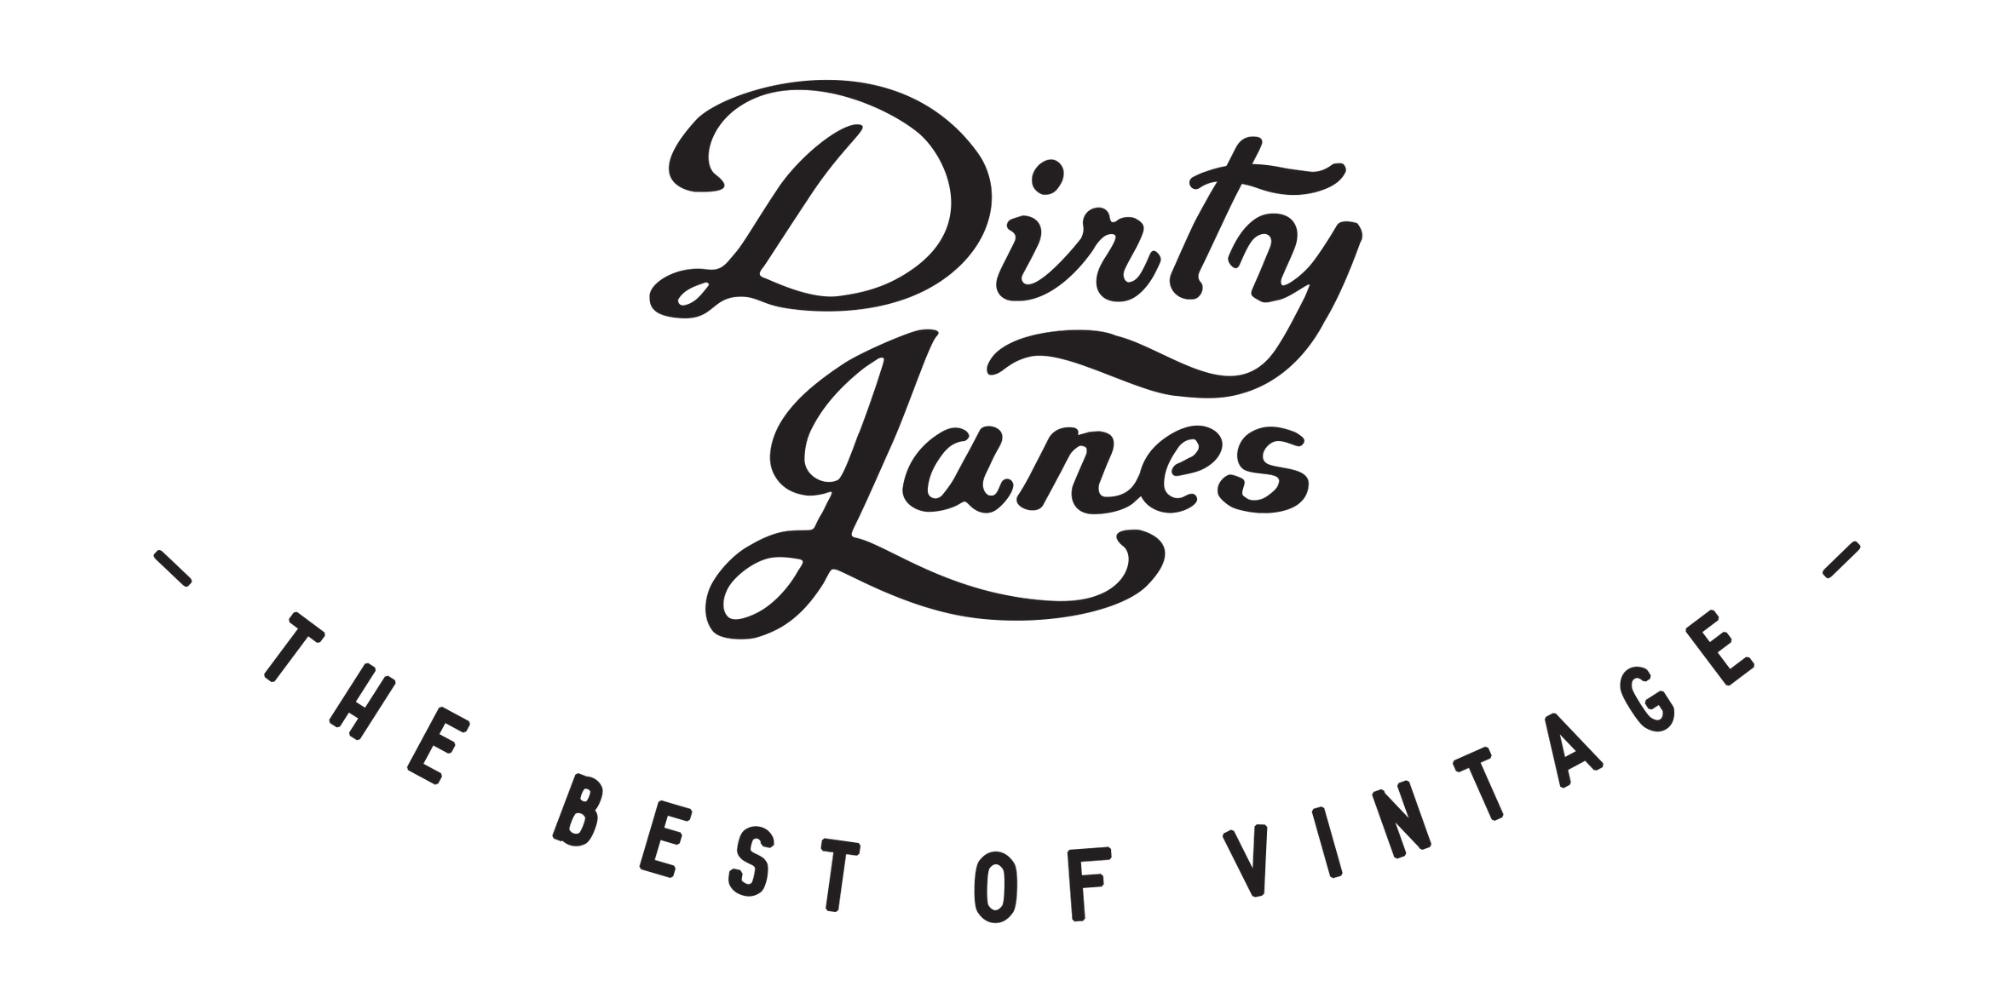 Dirty Janes